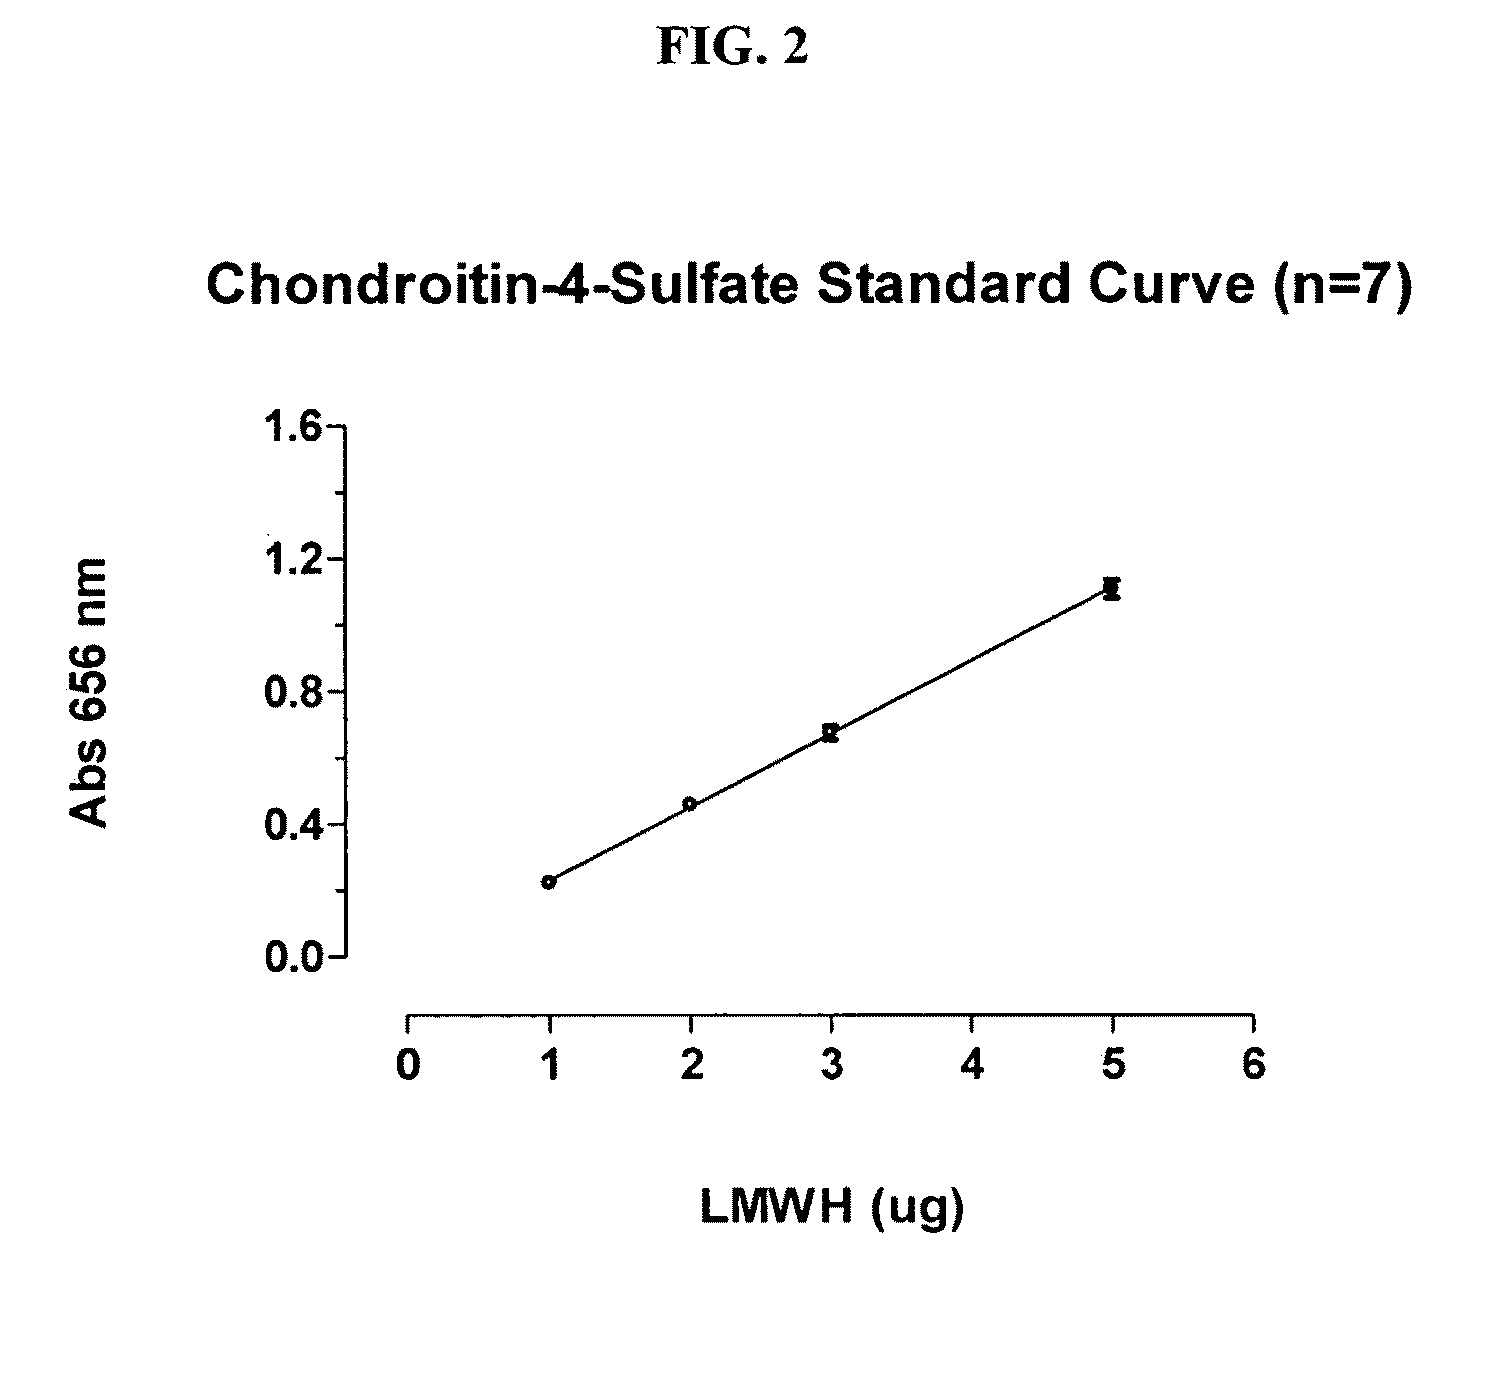 Method for measuring the concentration of a glycosaminoglycan anticoagulant